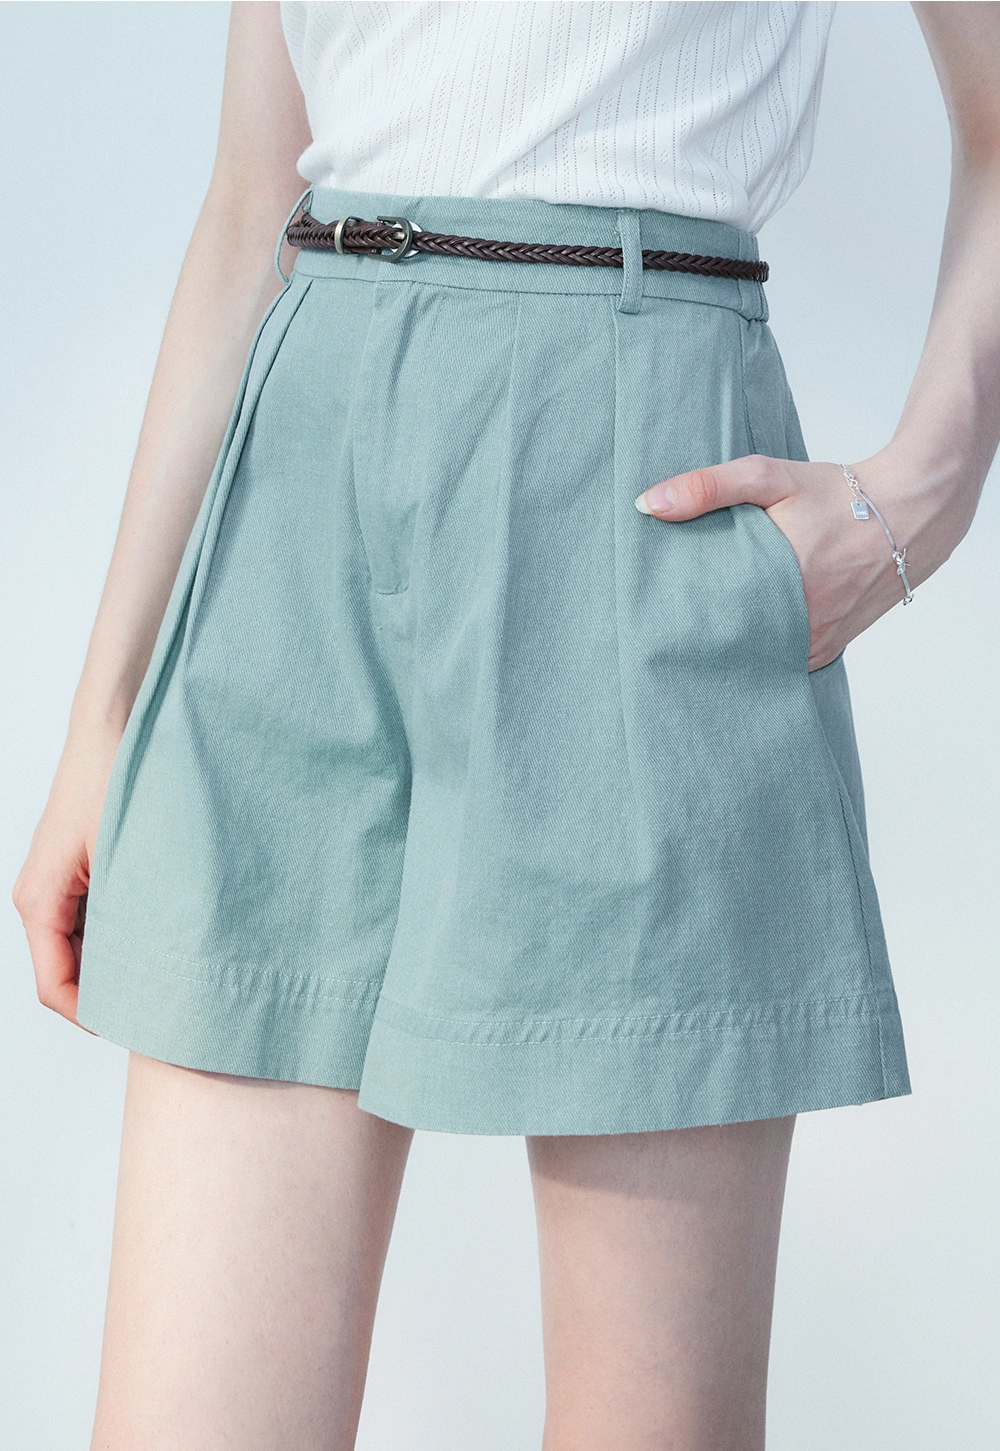 Chic Pleated Shorts with Braided Belt Detail